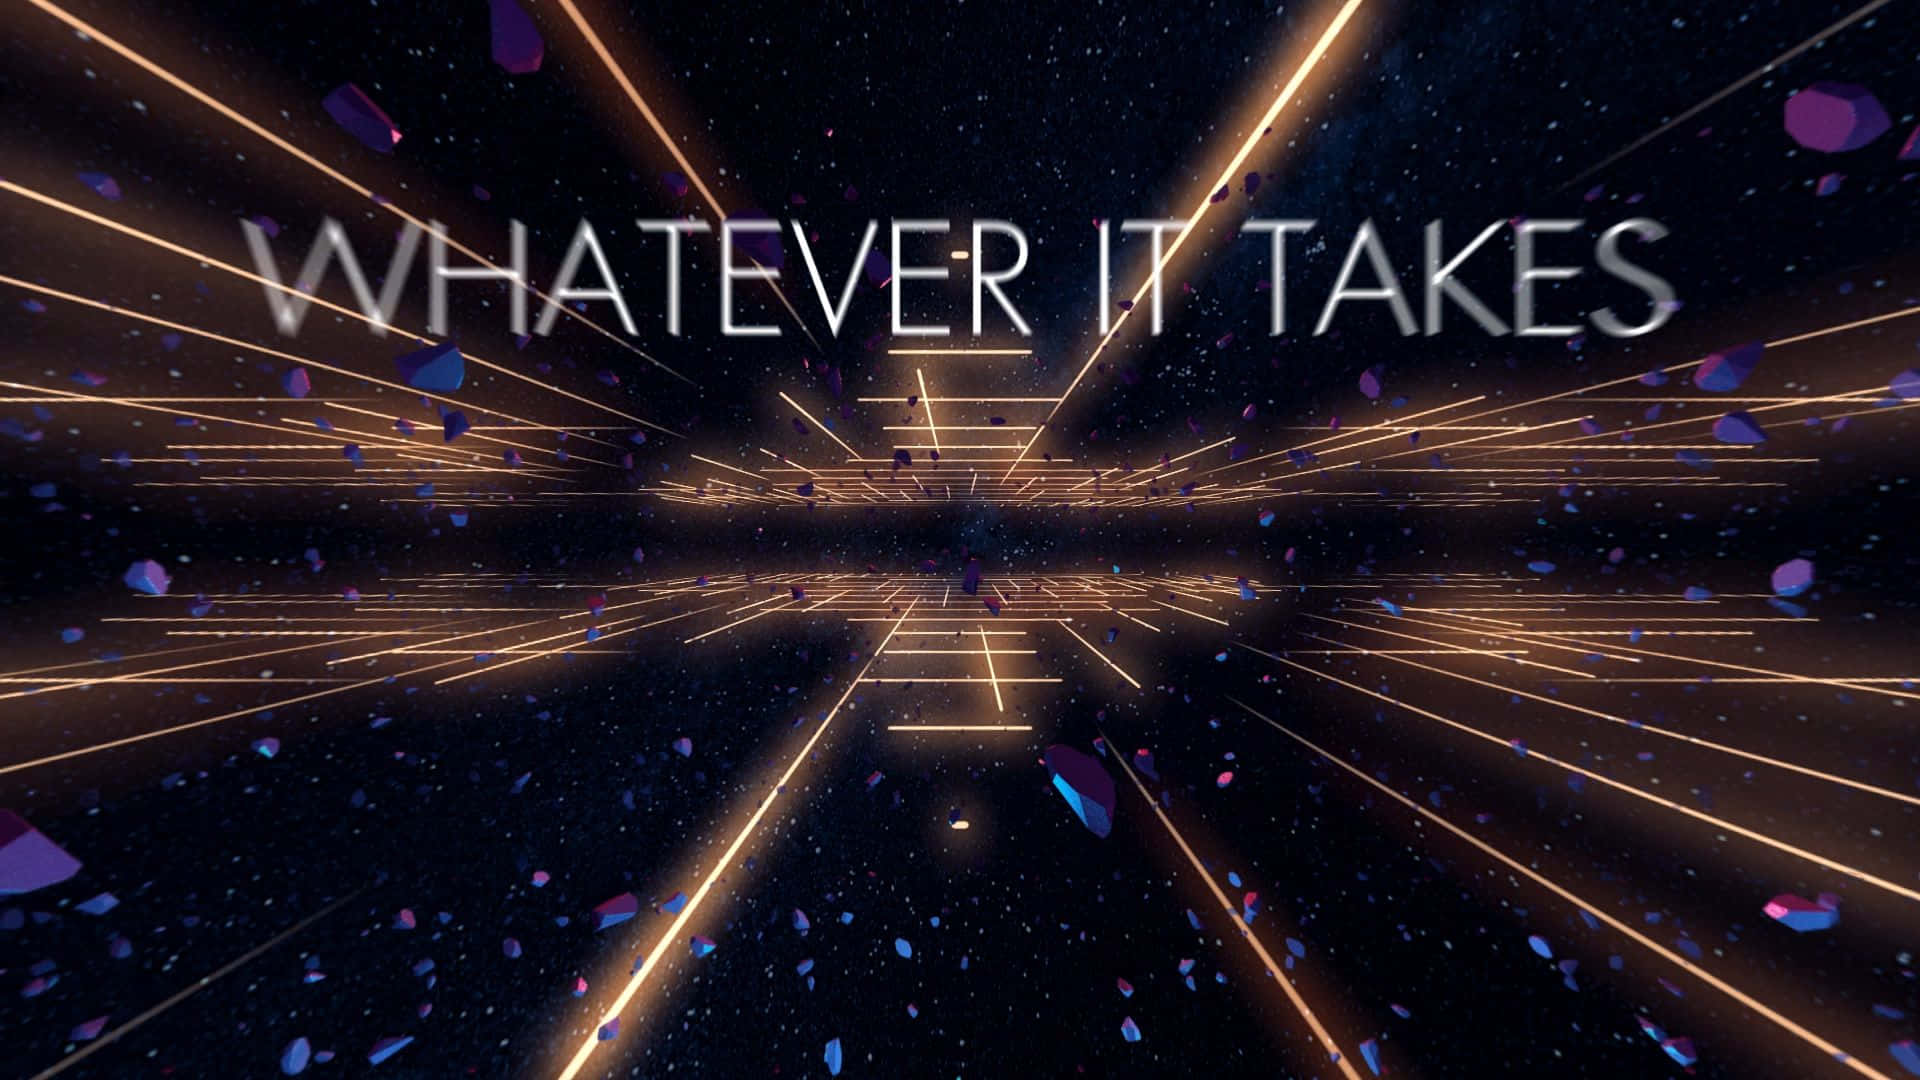 Whatever It Takes - A Space With A Neon Light Wallpaper